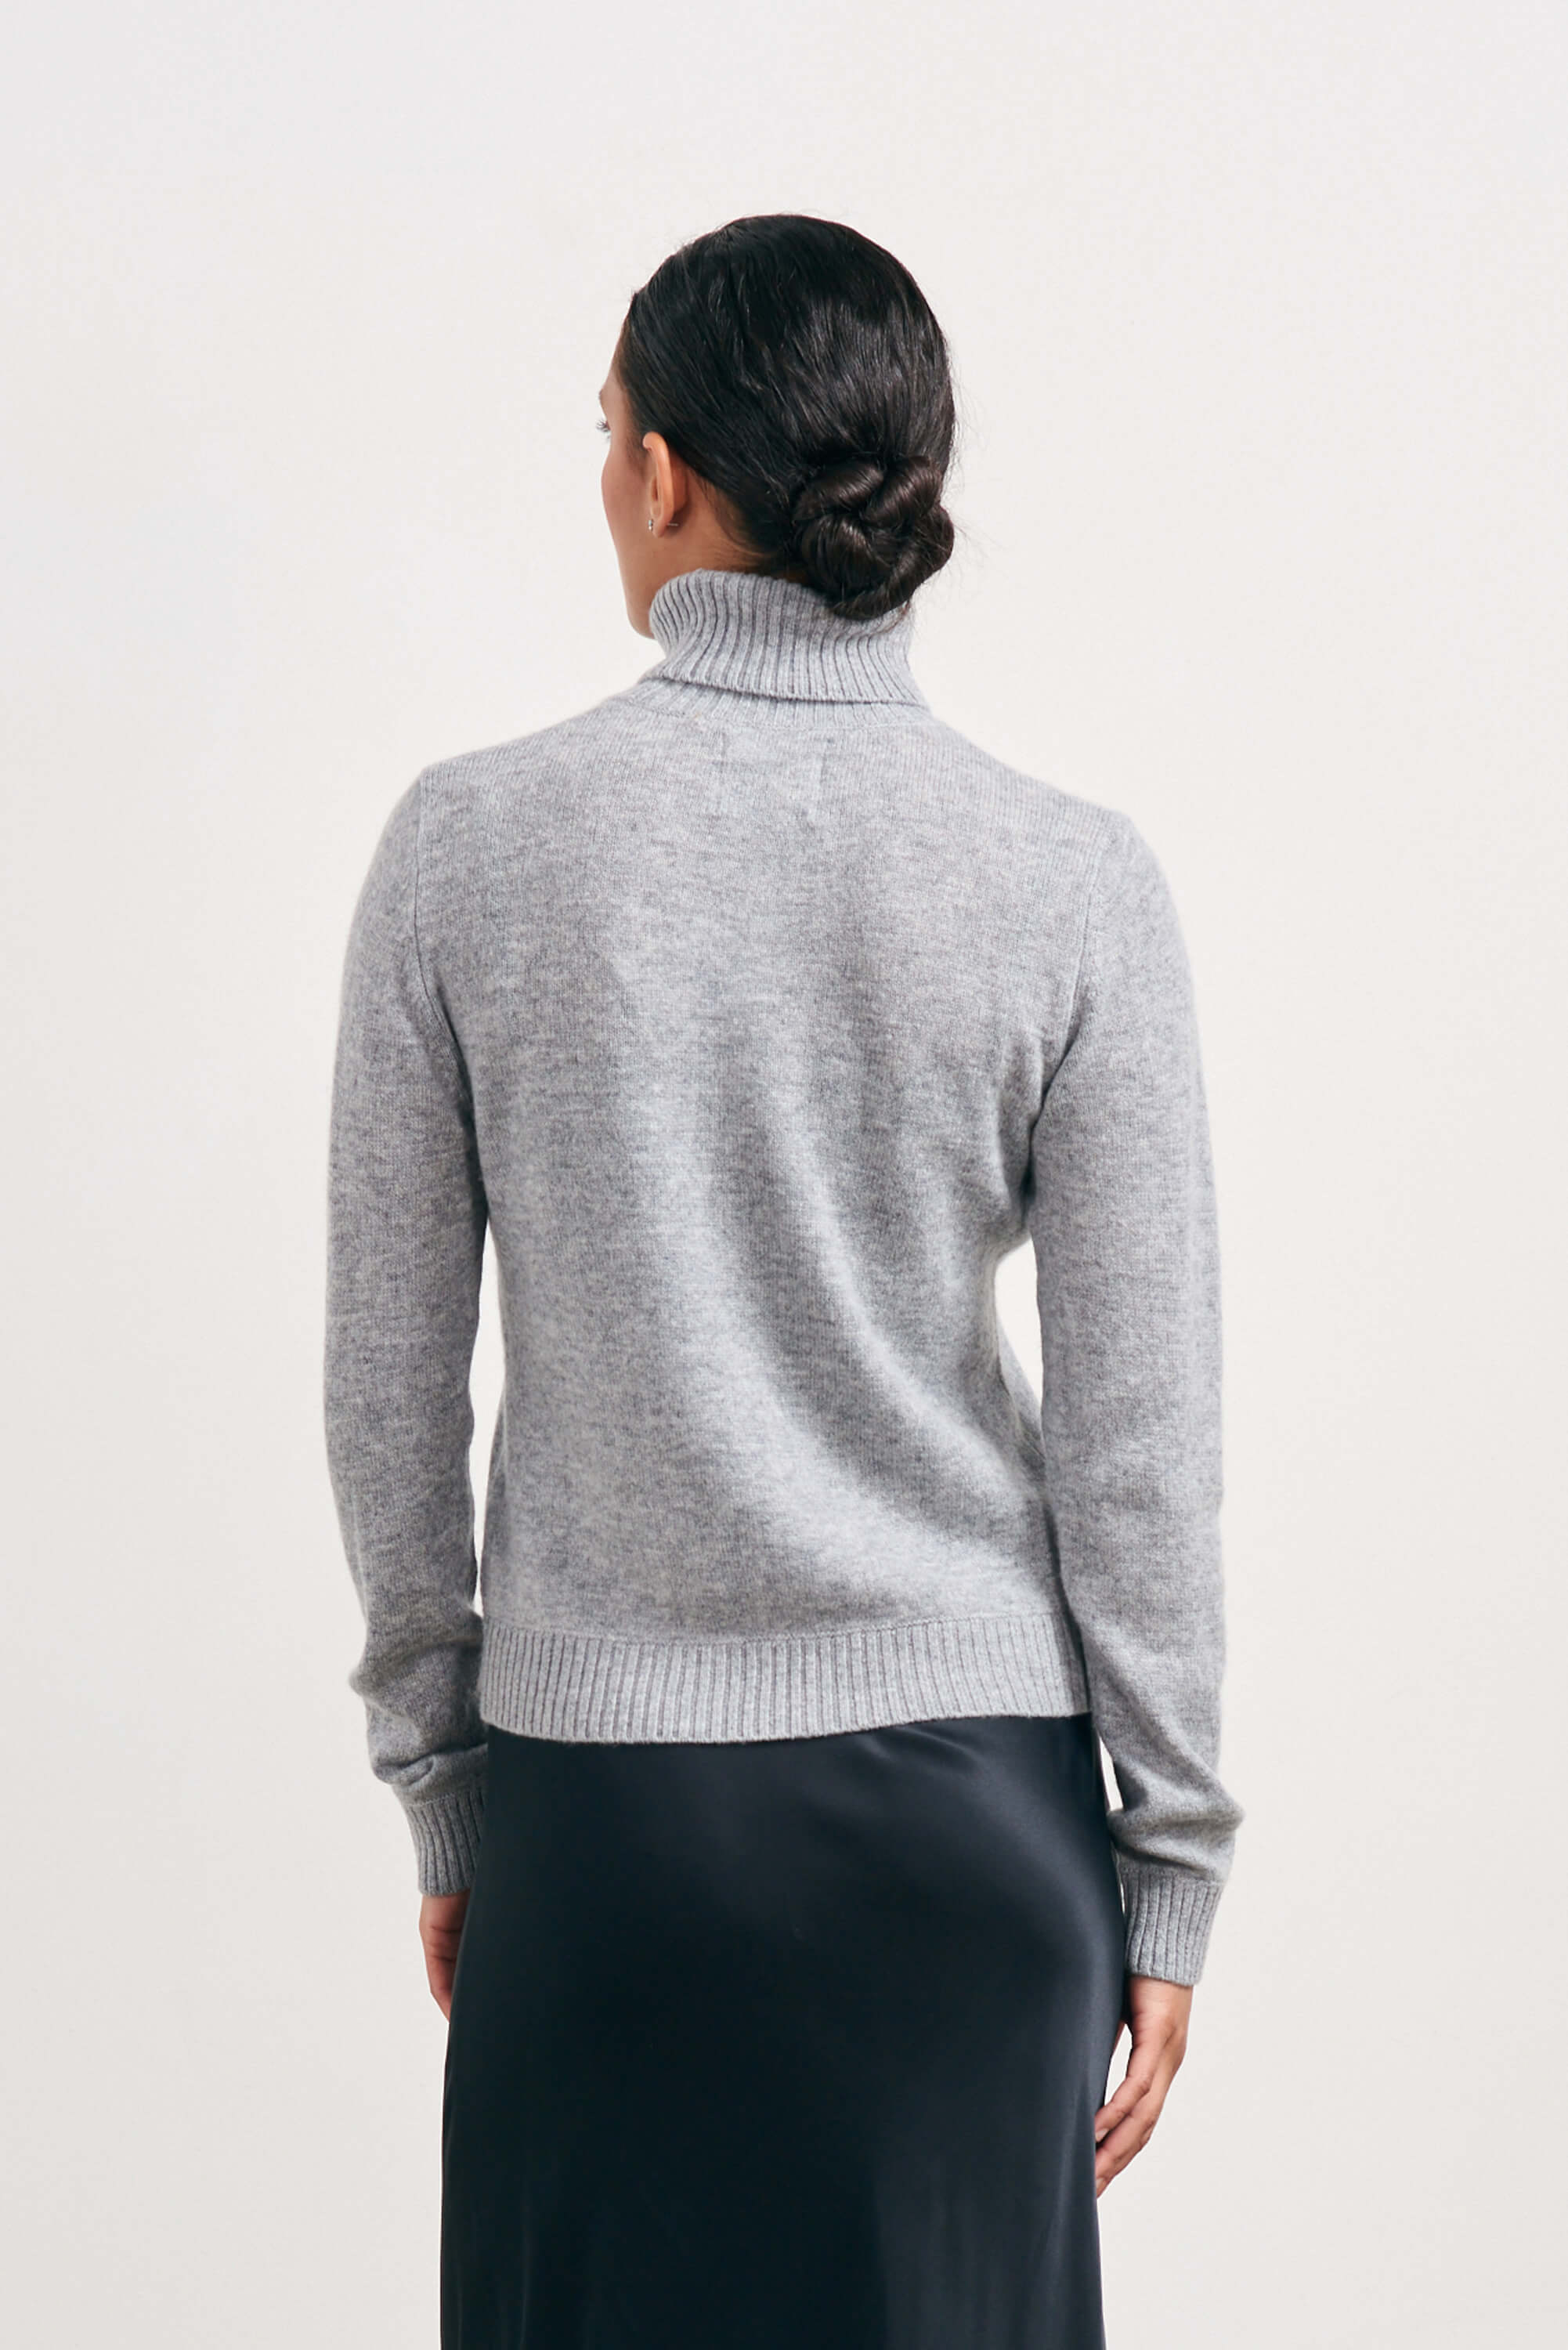 Brown haired female model wearing Jumper1234 lightweight cashmere roll neck in mid grey facing away from the camera